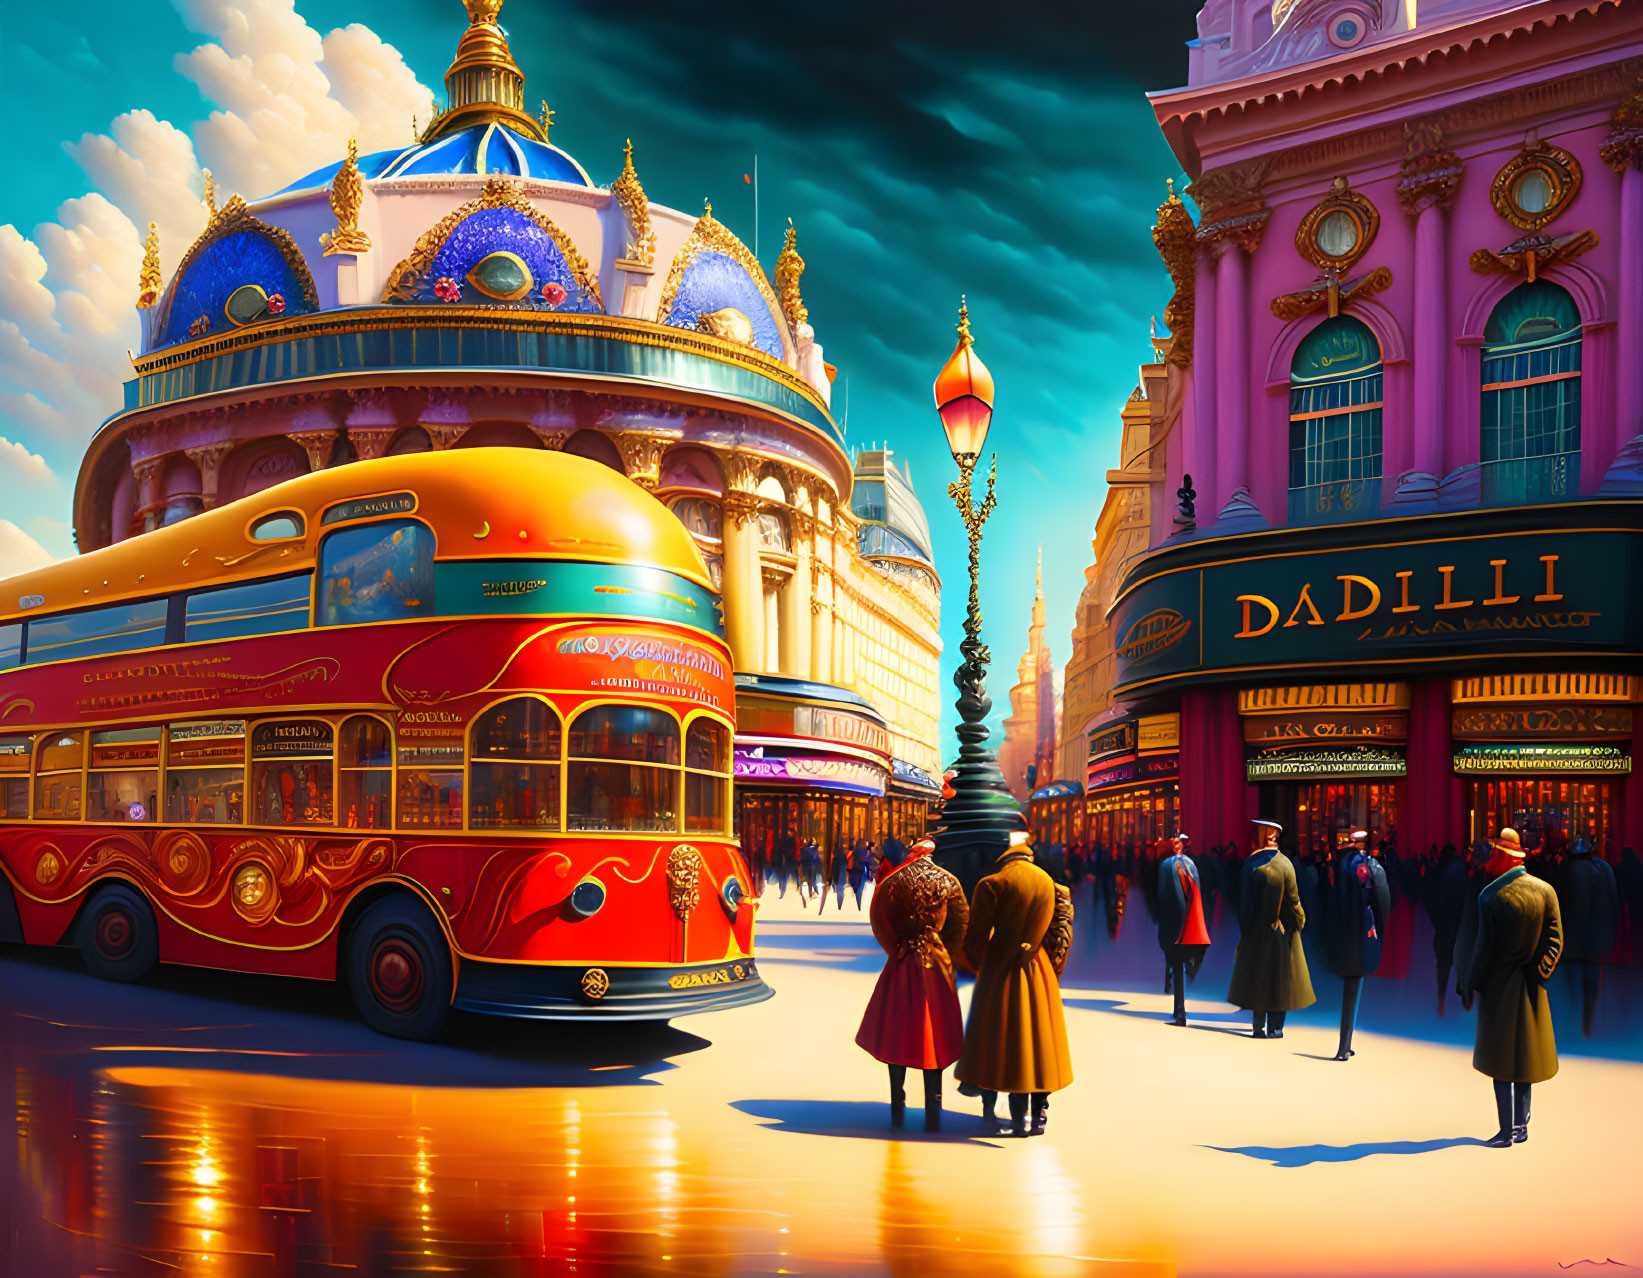 Colorful cityscape with red double-decker bus and vintage-clad people under blue sky